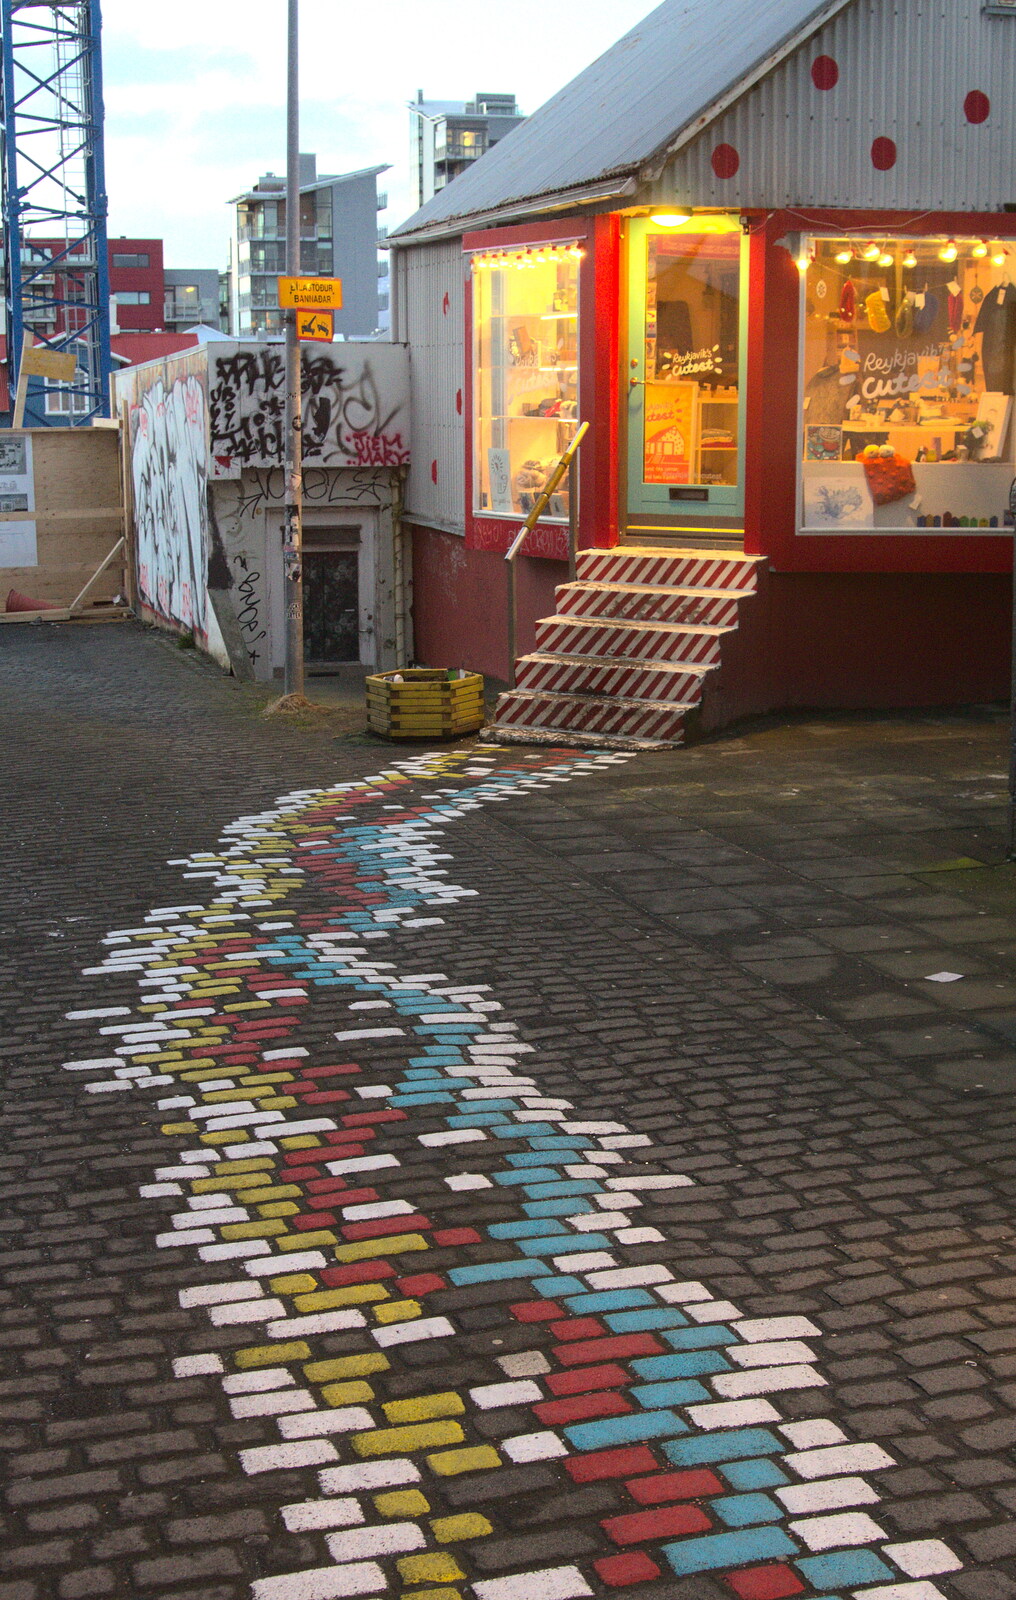 Painted paving from A Trip to Reykjavik, Iceland - 20th April 2017